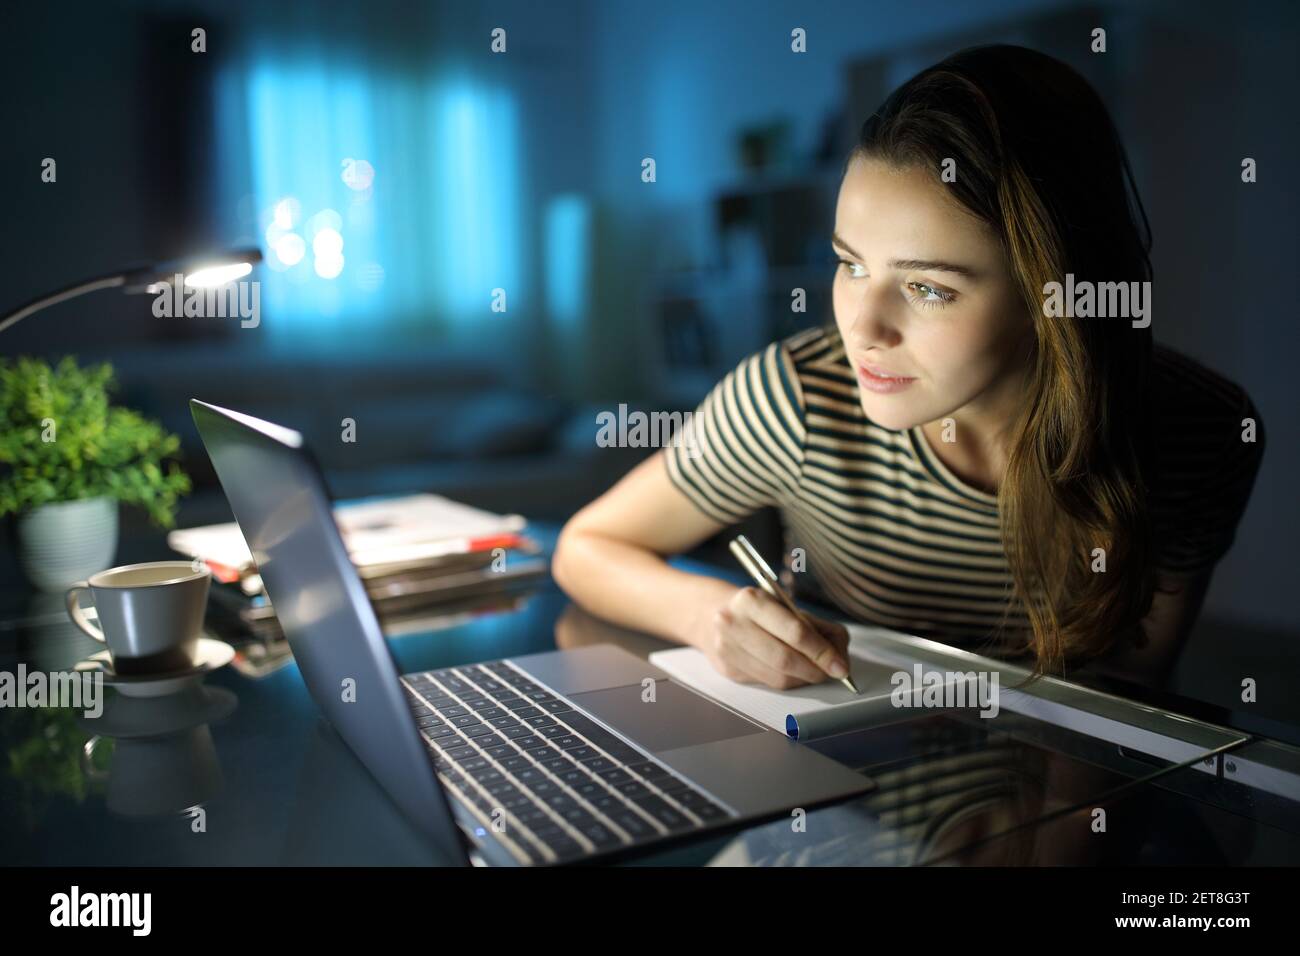 Concentrated woman writing notes checking laptop content in the night at home Stock Photo